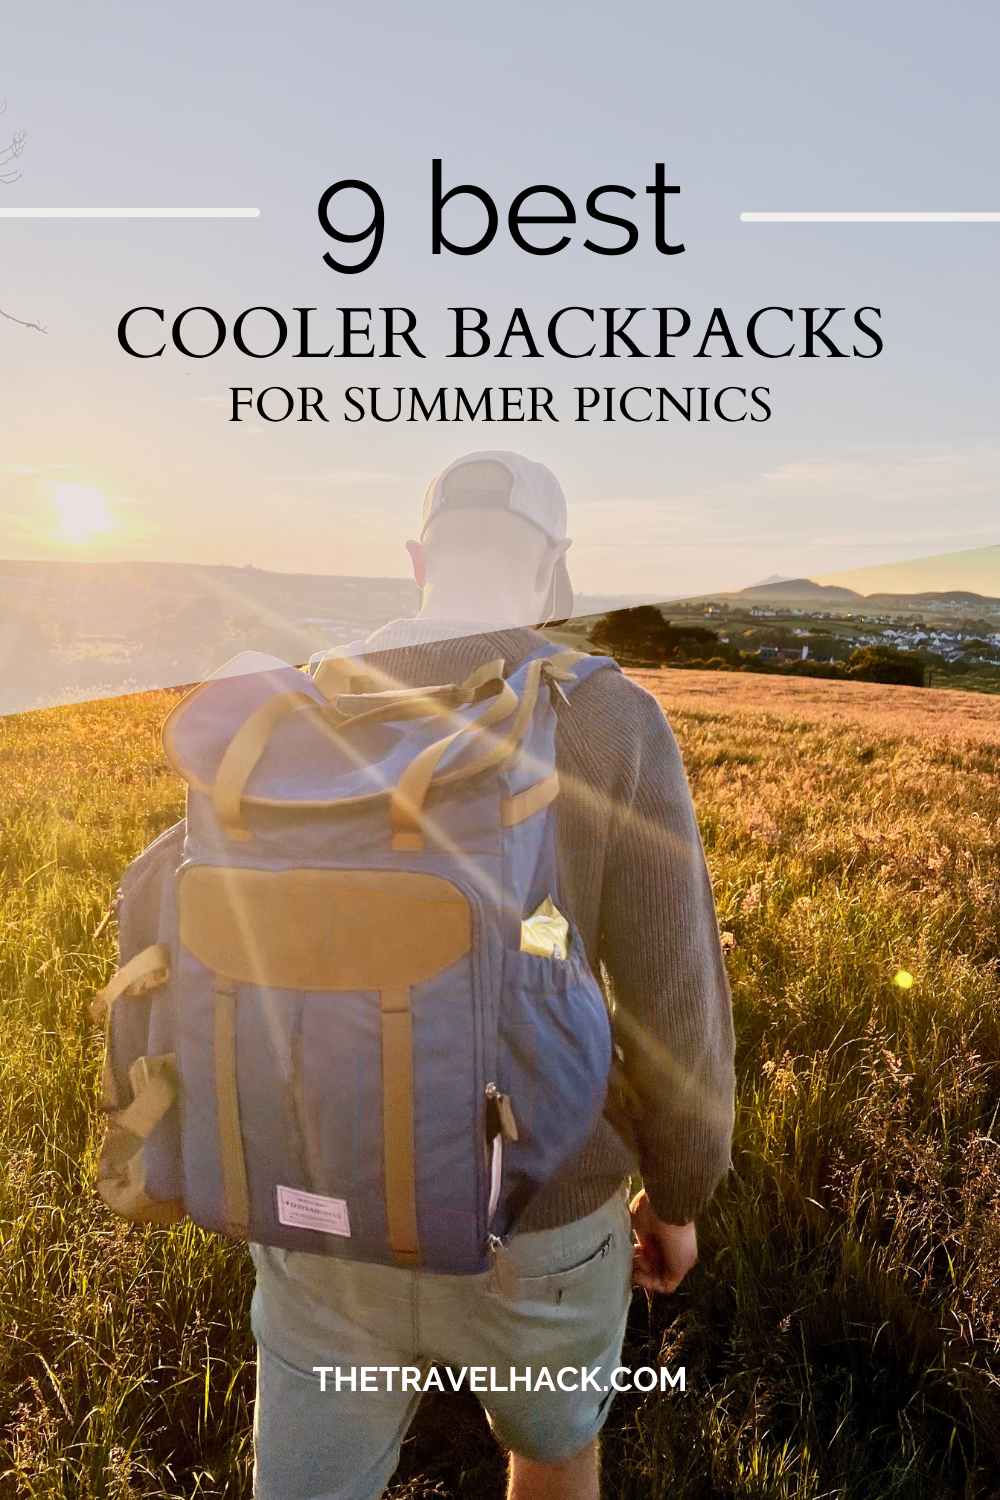 Cooler backpacks and cool bags for a perfect summer picnic